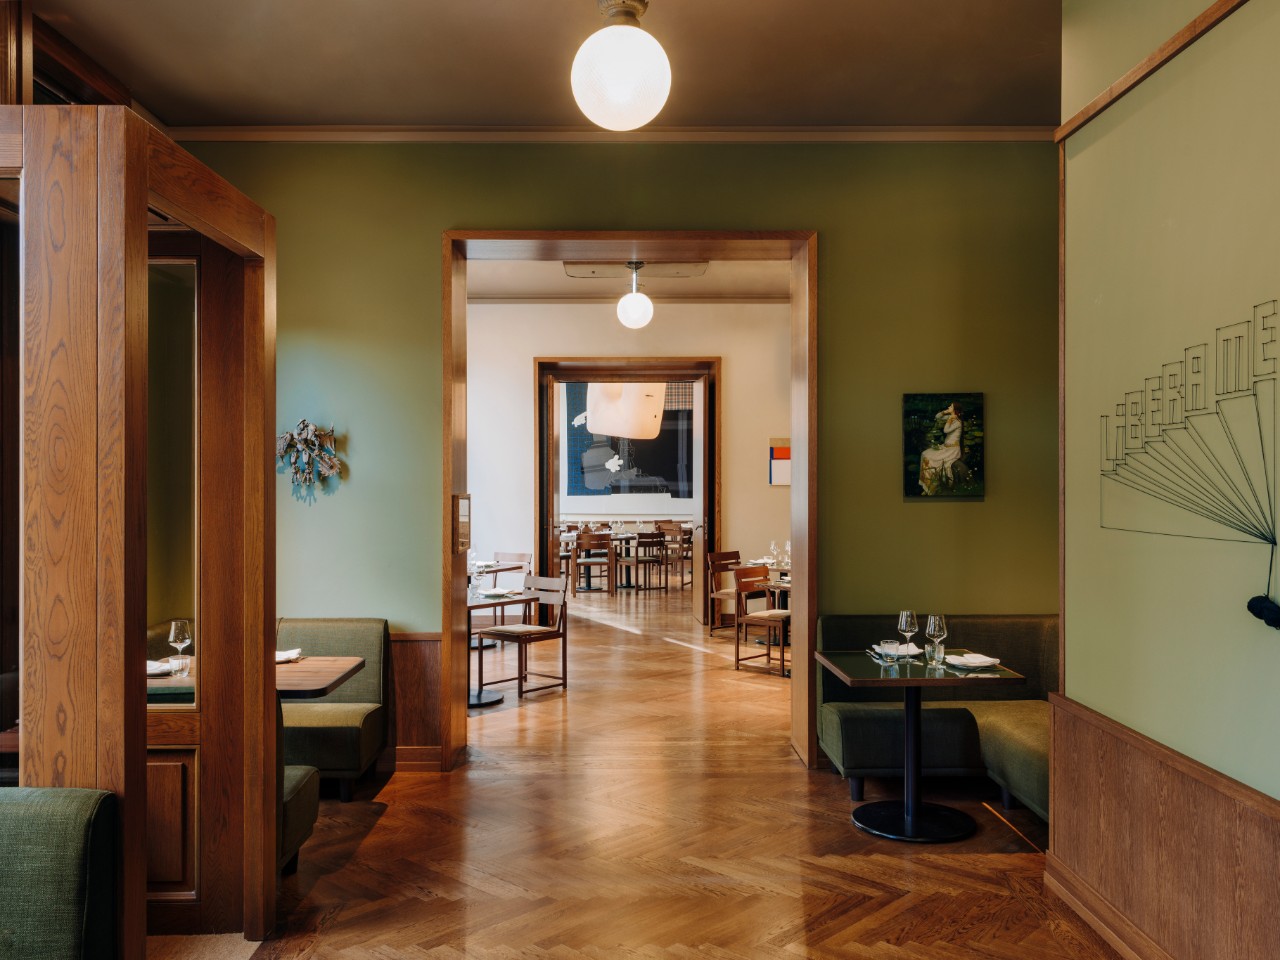 Chateau Royal Hotel in Berlin: contemporary eclecticism